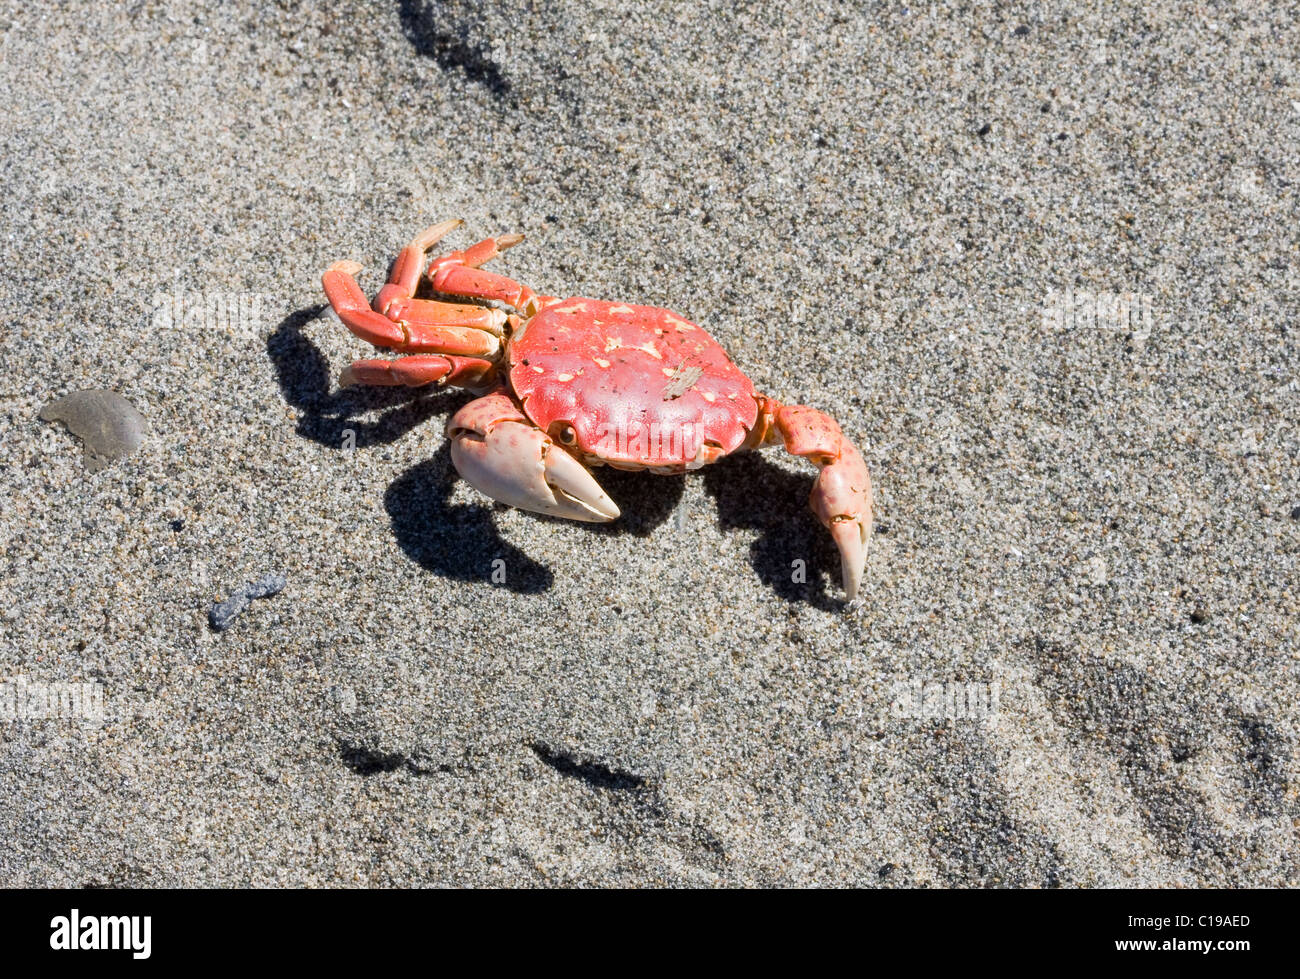 Small red rock crab with claw raised on a silver sand beach on Vancouver Island Canada Stock Photo